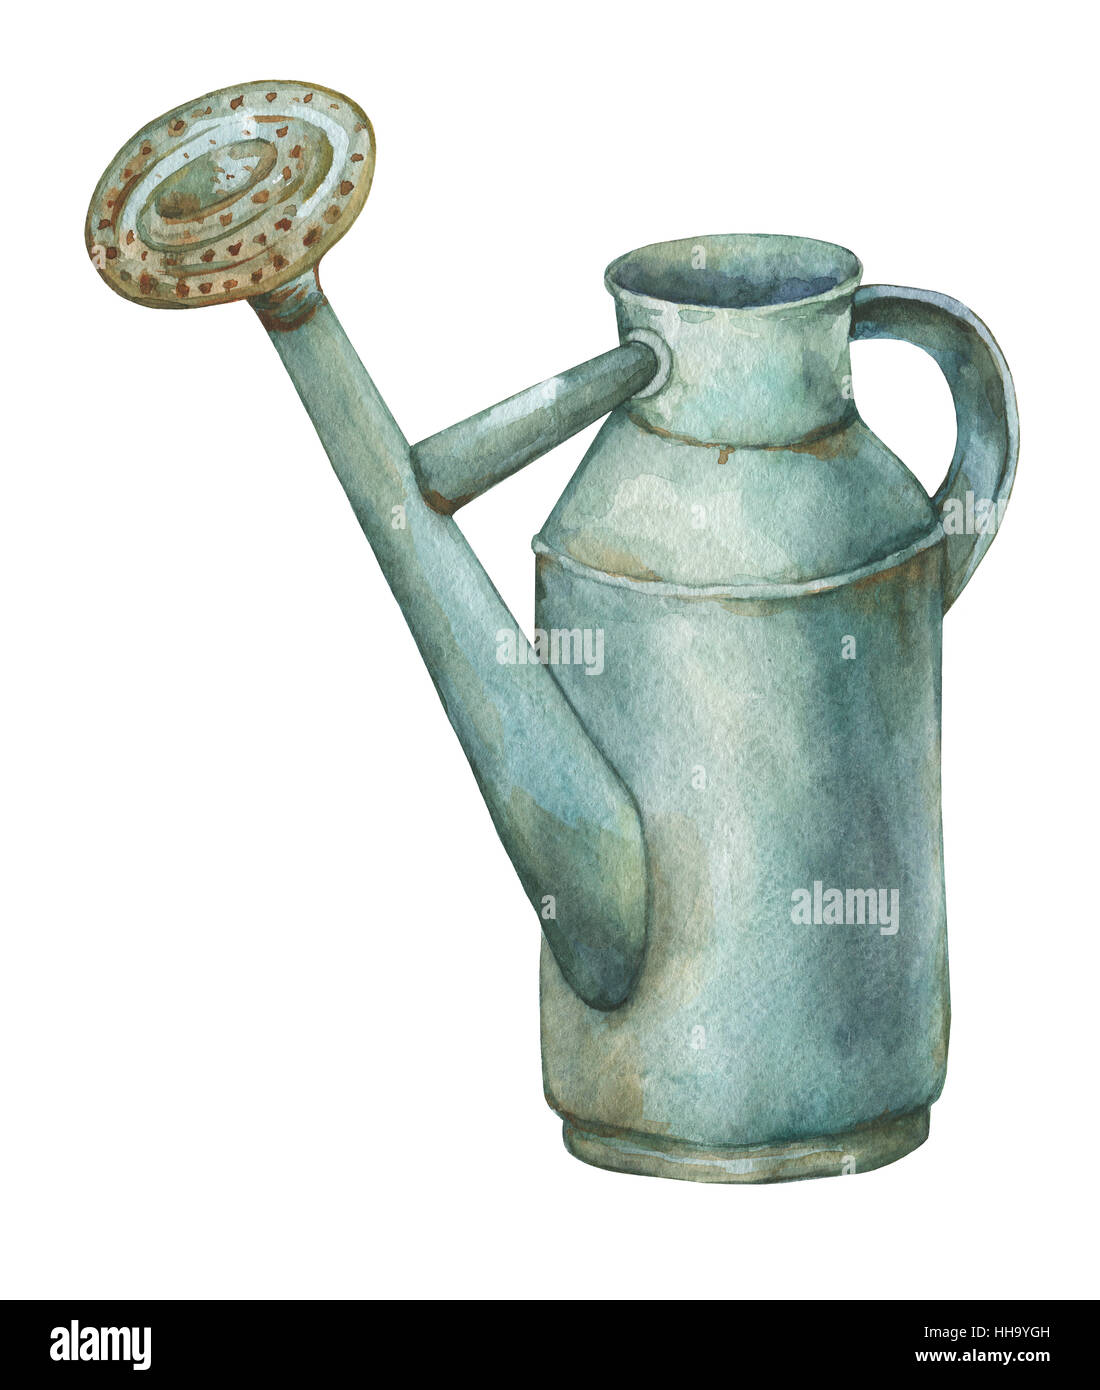 Gardening tools rusty tin watering can for watering flowers. Hand drawn watercolor painting on white background. Stock Photo